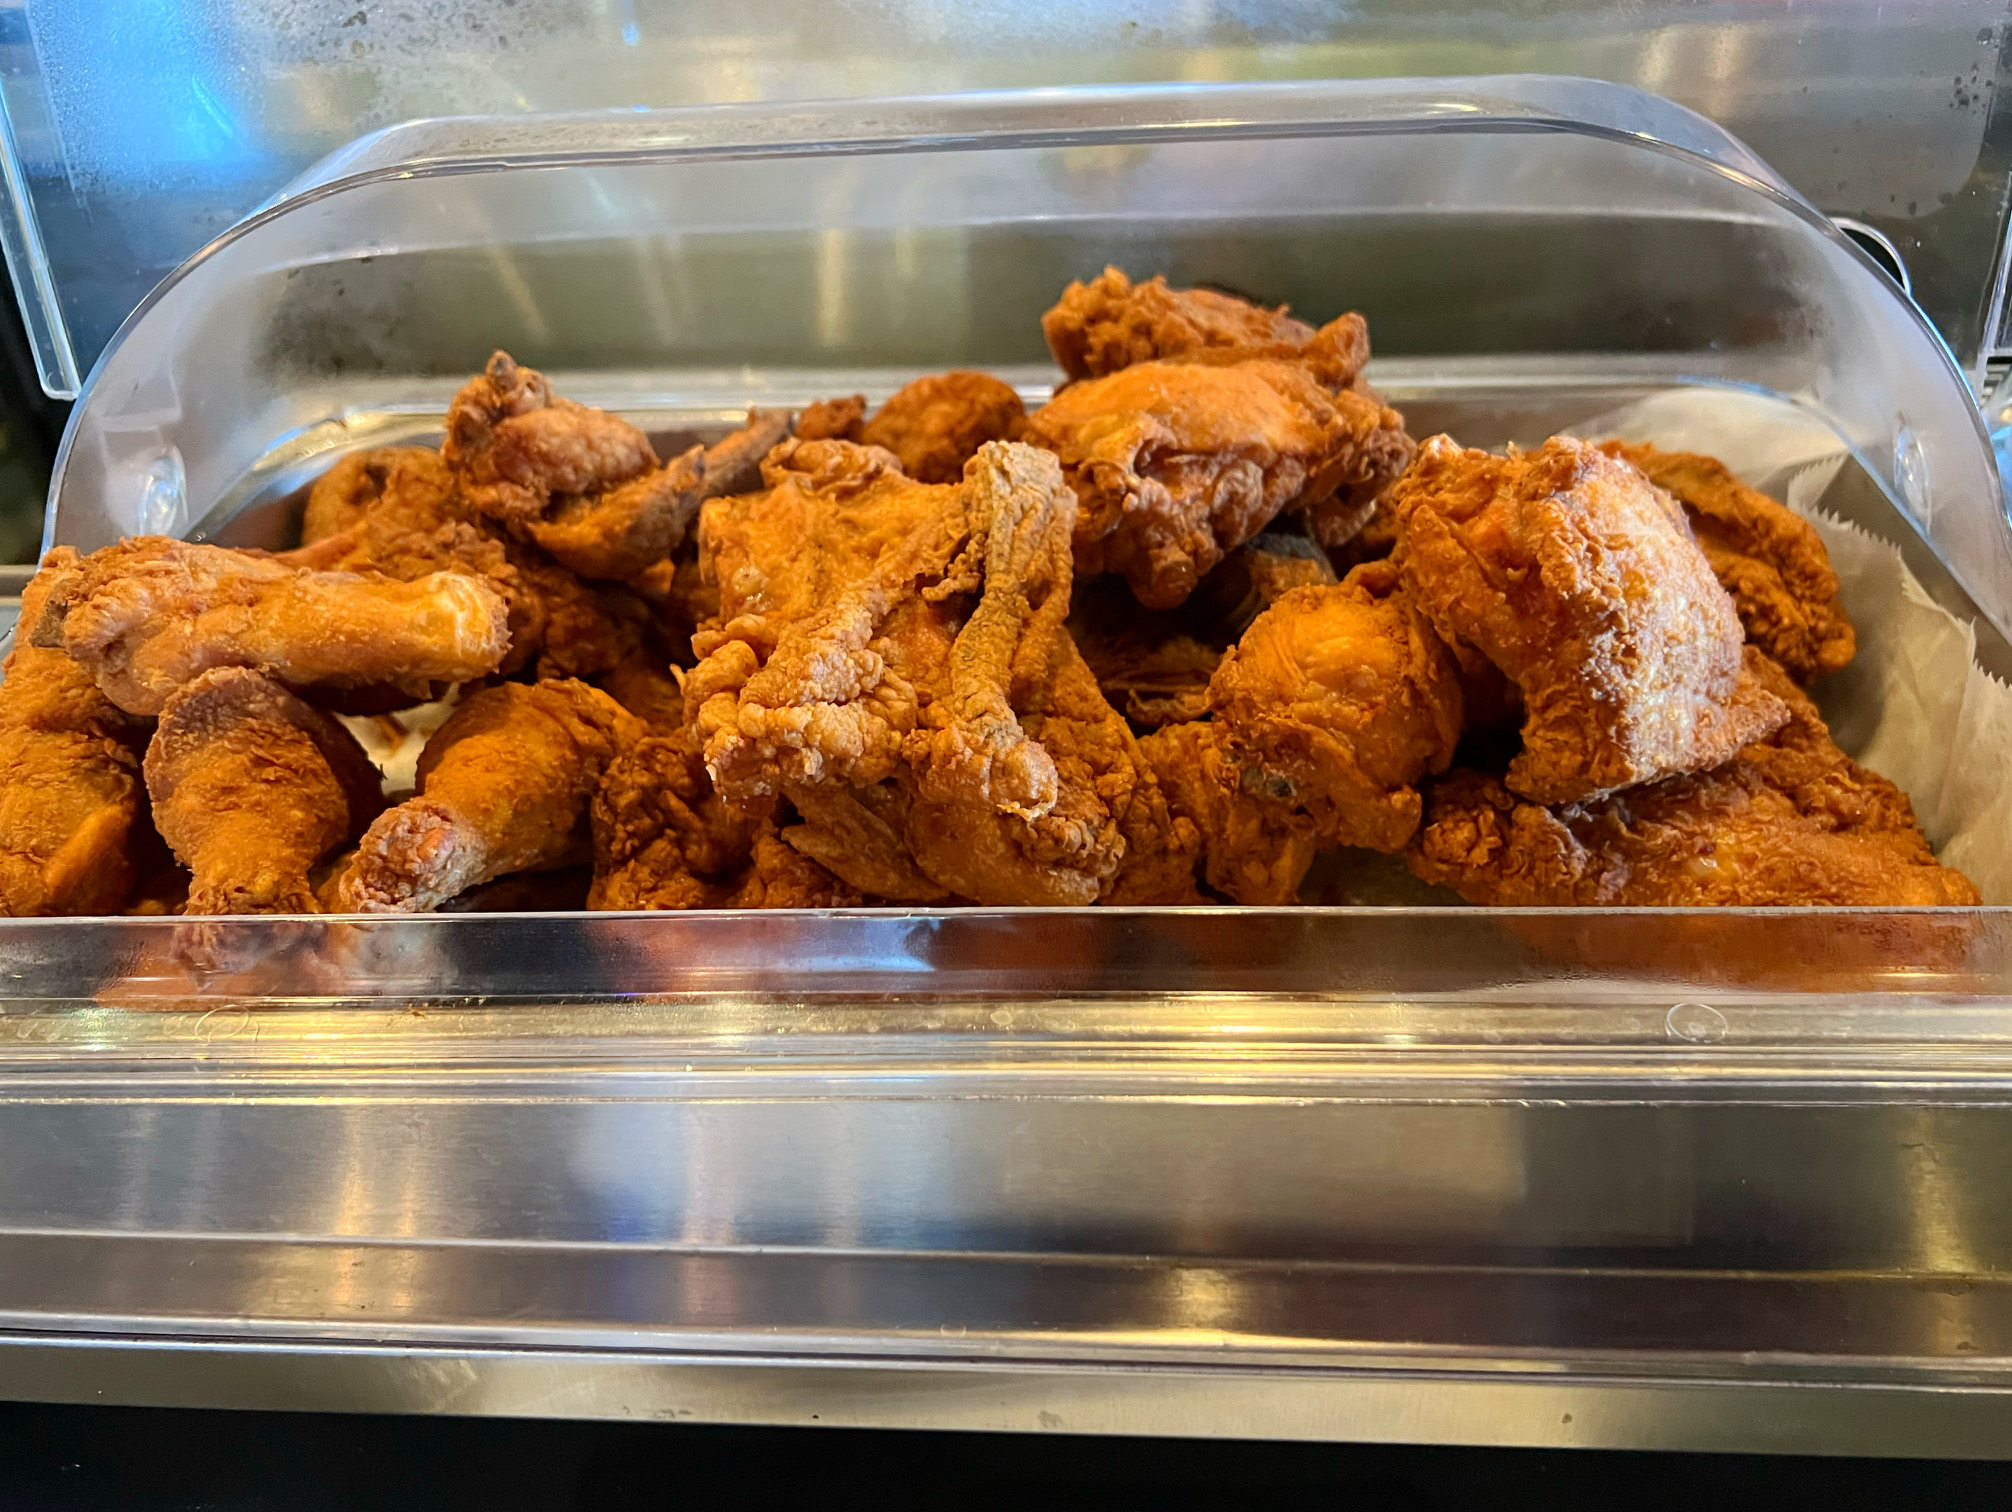 In a shiny metal pan, there is an overflowing amount of fried chicken. Photo by Alyssa Buckley.